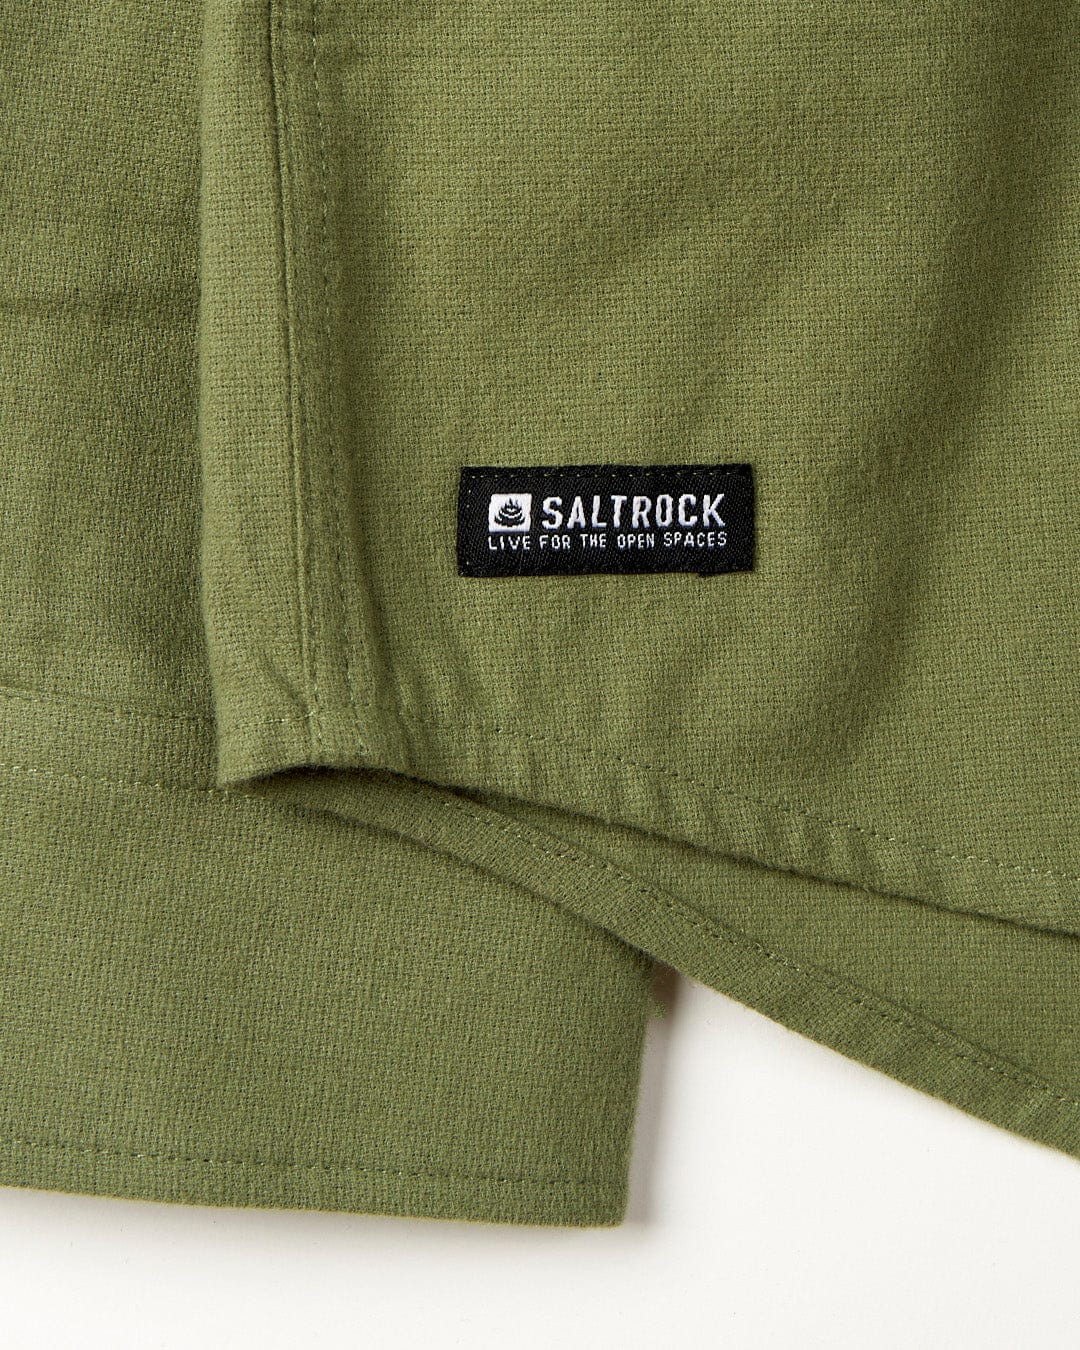 Close-up of a green, 100% cotton Penare - Mens Long Sleeve Shirt with a Saltrock brand label on a collared shirt.